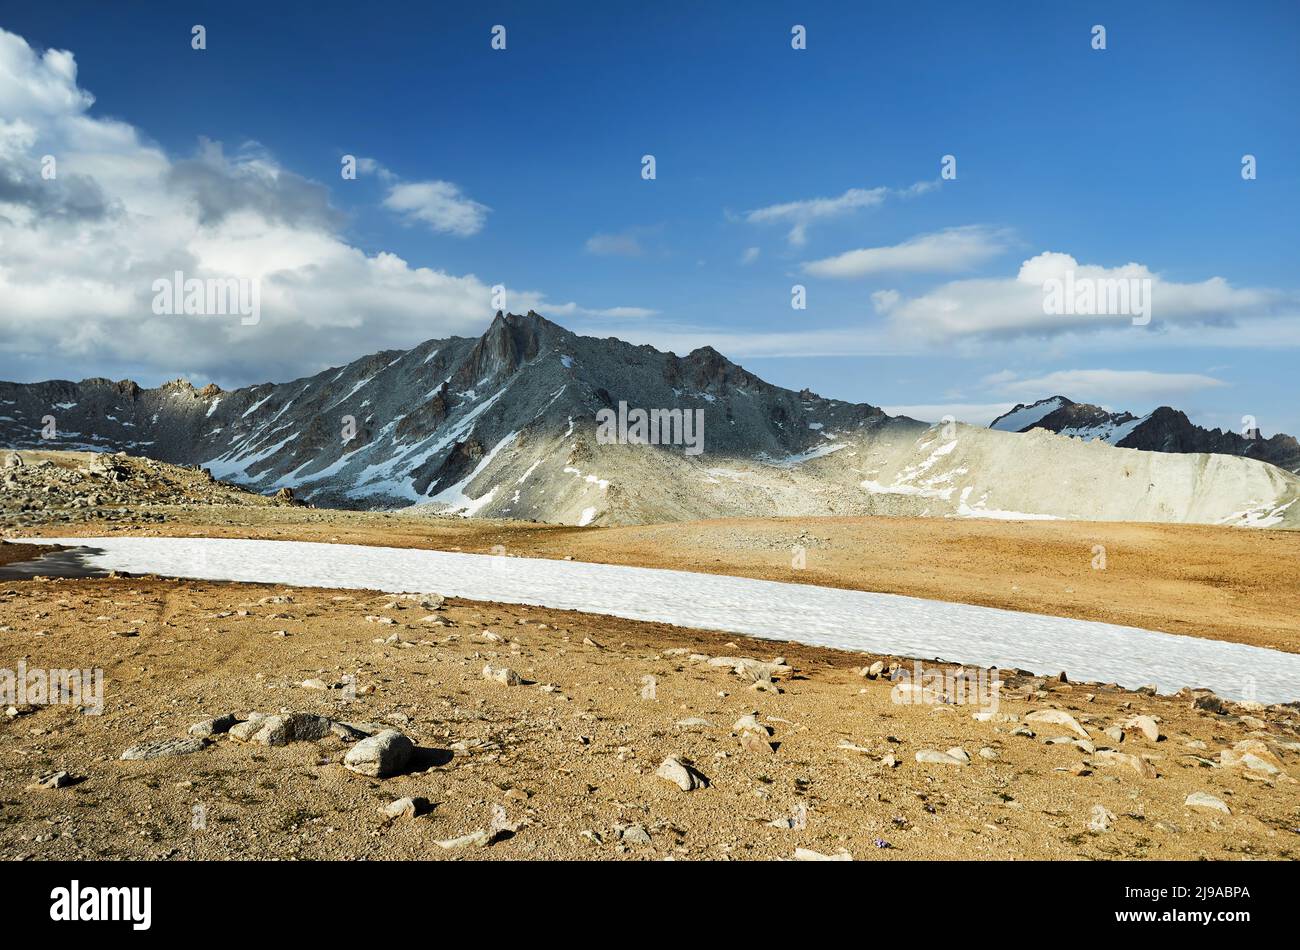 Beautiful scenery of the big ice glacier and snow mountains at cloudy blue in Tien Shan, Kazakhstan. Stock Photo